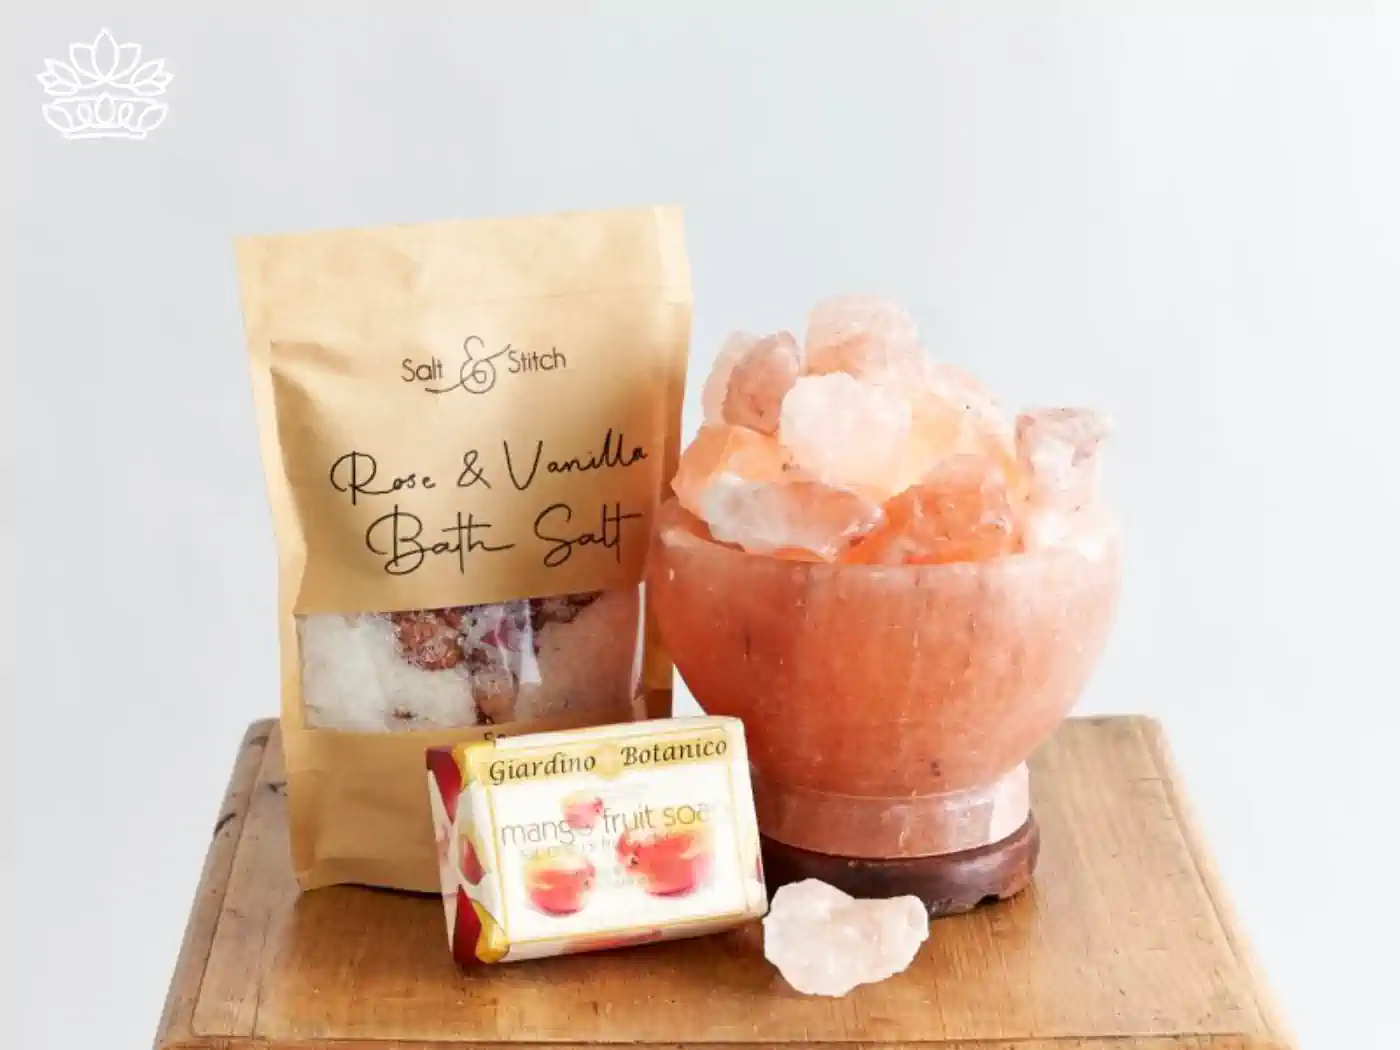 A soothing display of wellness products including Rose & Vanilla bath salt in a paper pouch and a mango fruit soap beside a salt lamp on a wooden surface, part of the mental health gift boxes by Fabulous Flowers and Gifts. Delivered with a focus on nurturing and relaxation.